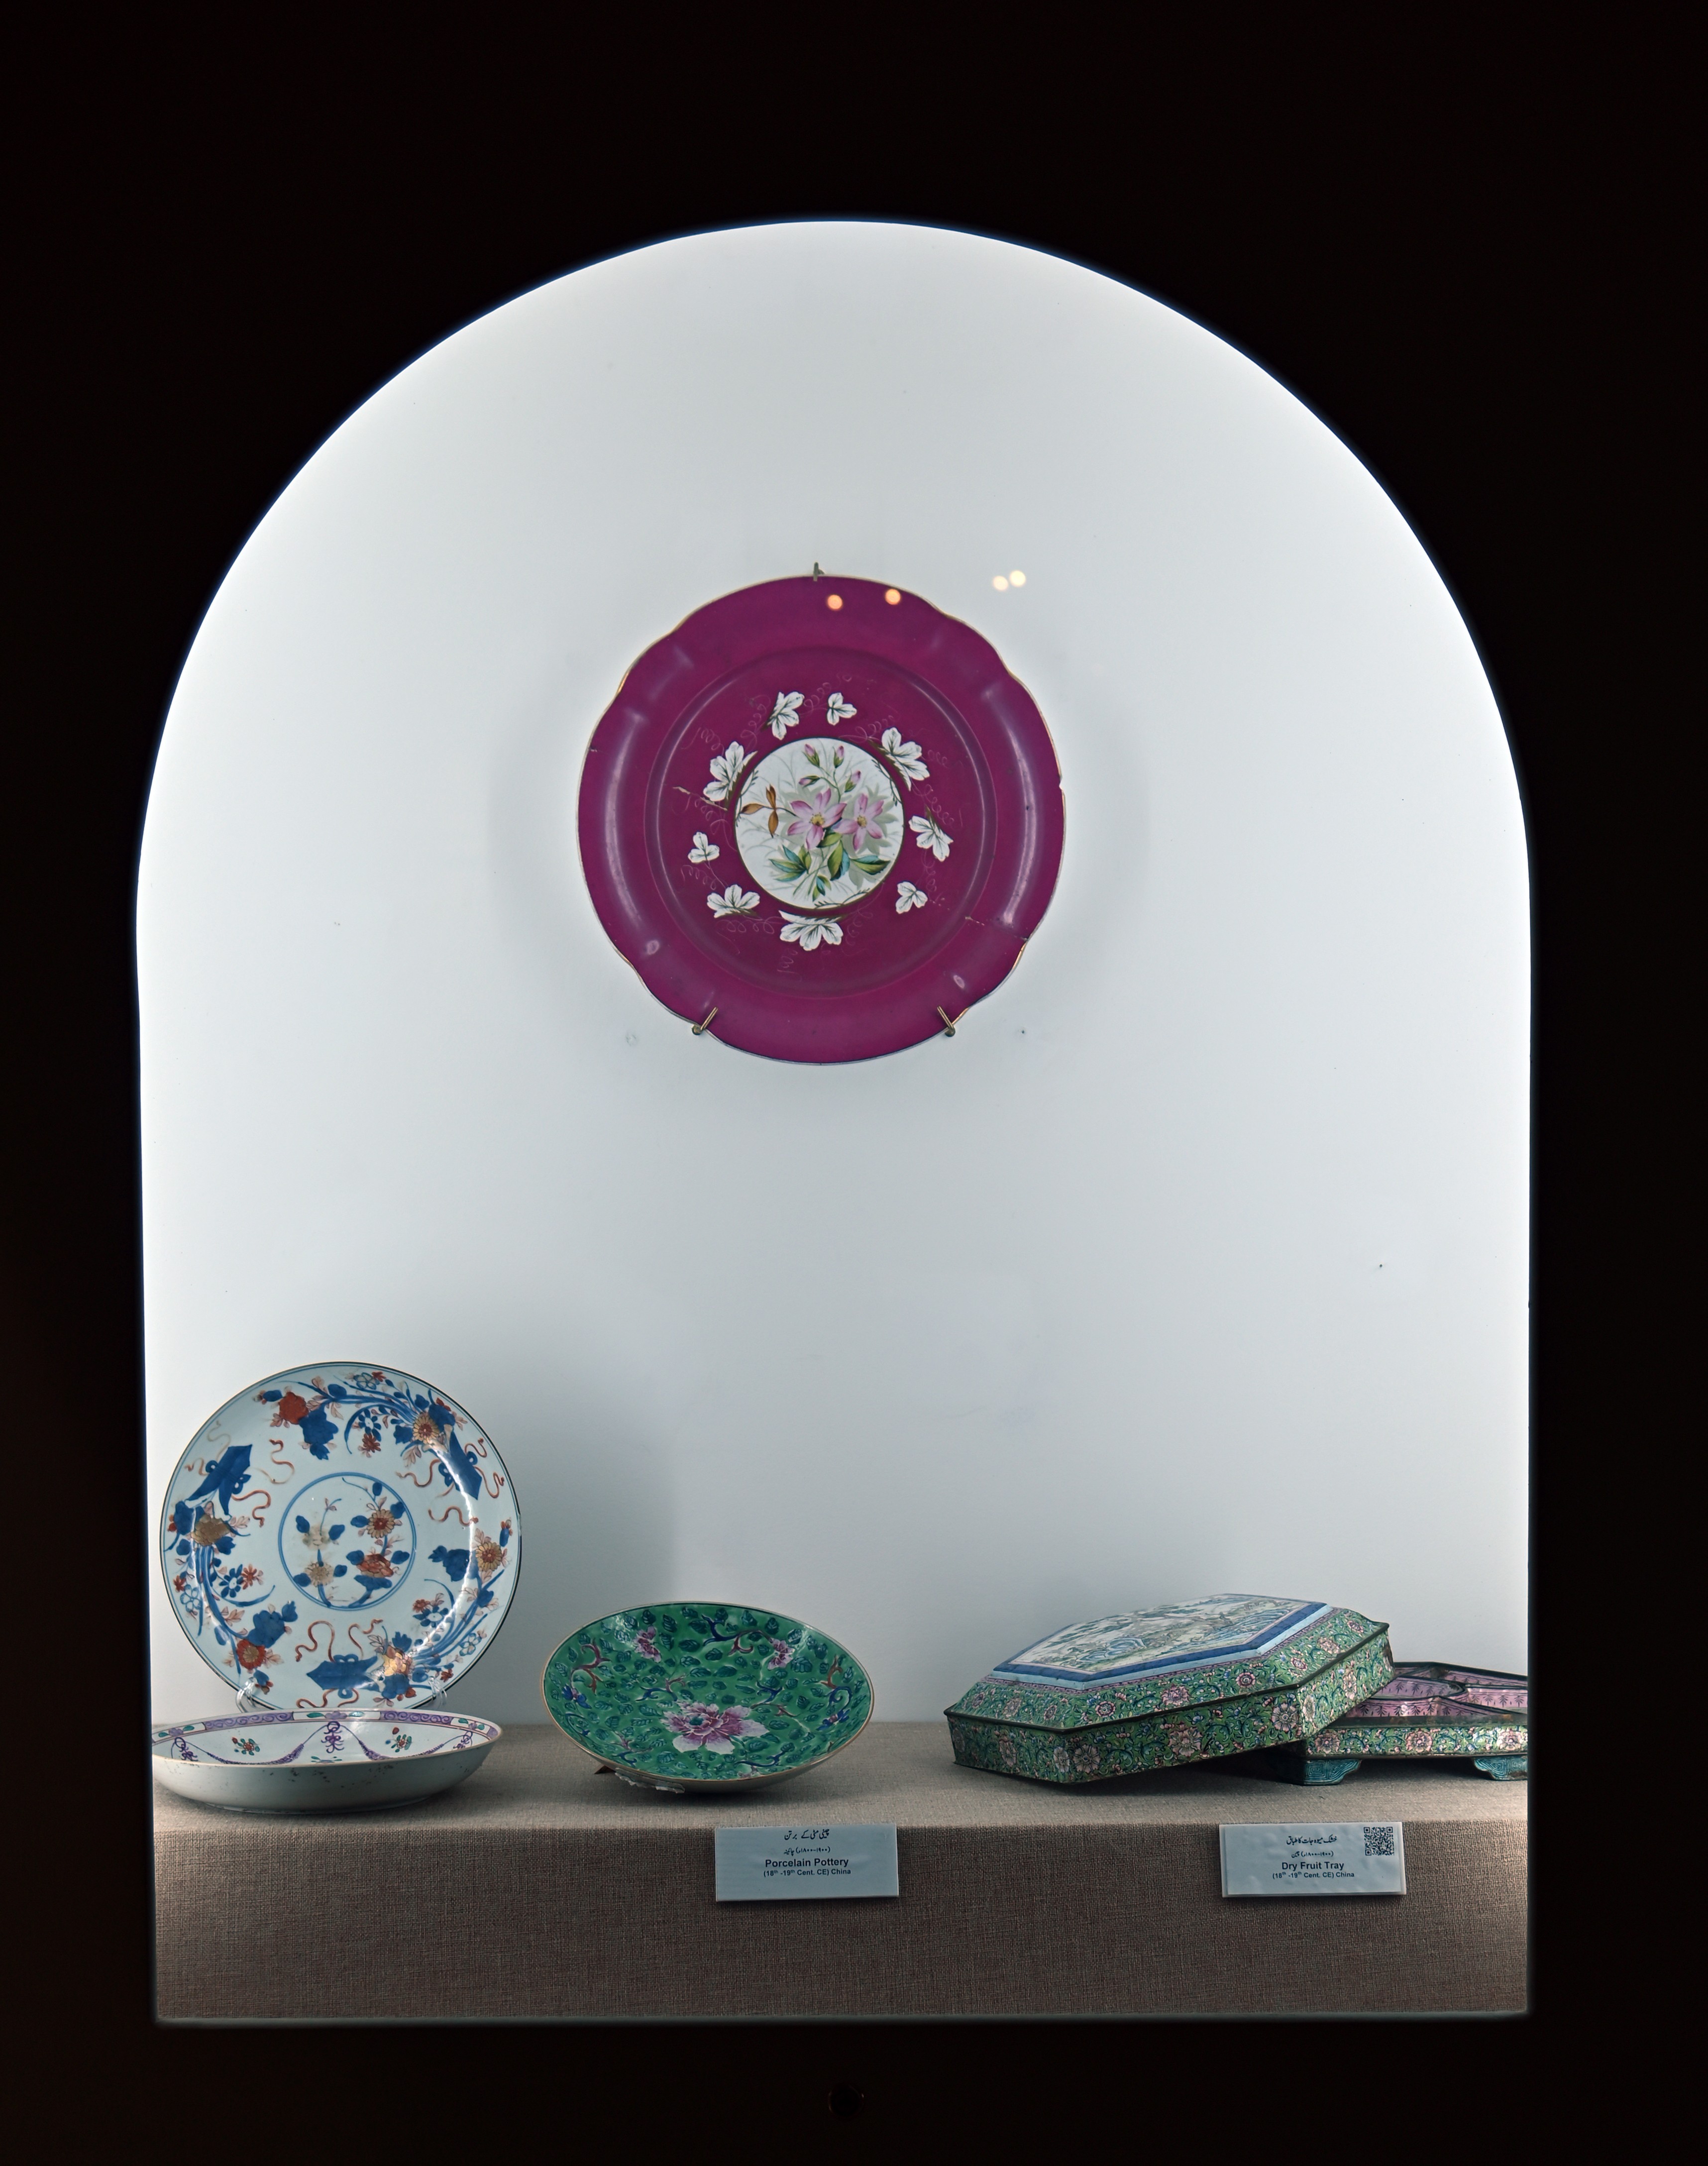 The Porcelain Pottery having plates and The Dryfruits Tray